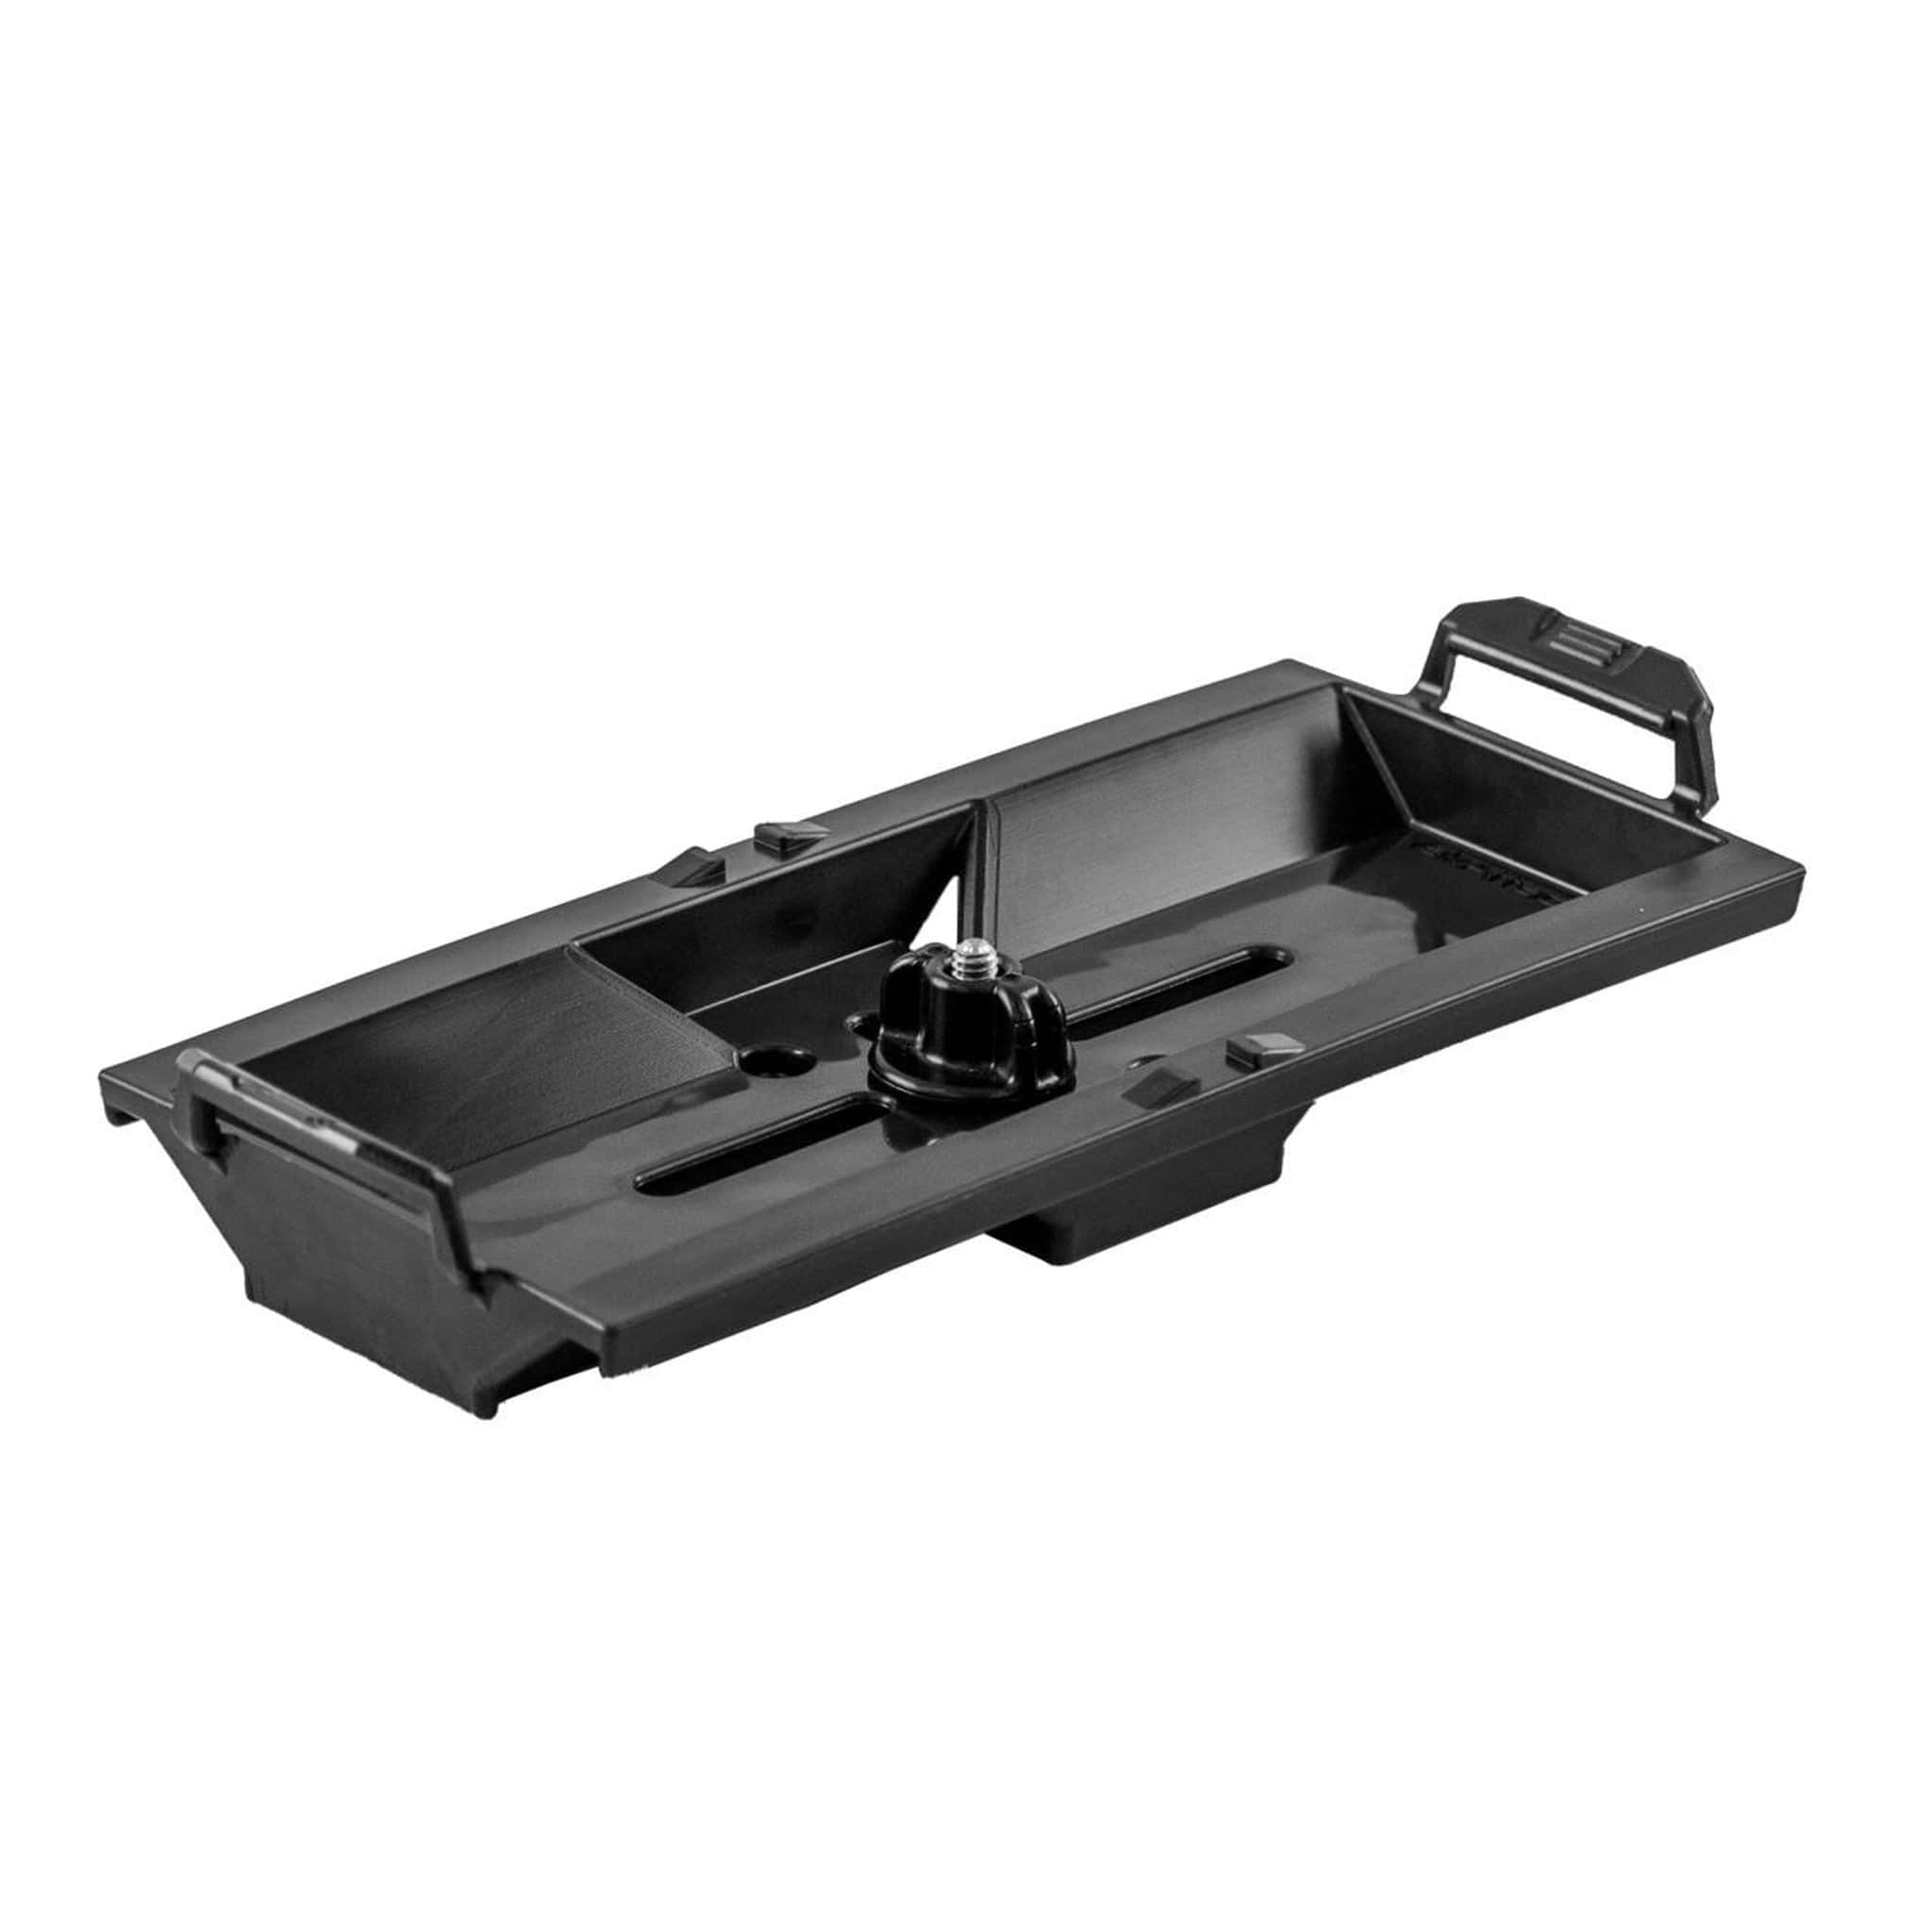 tracpak-quick-release-base-mount-only__21402.jpg